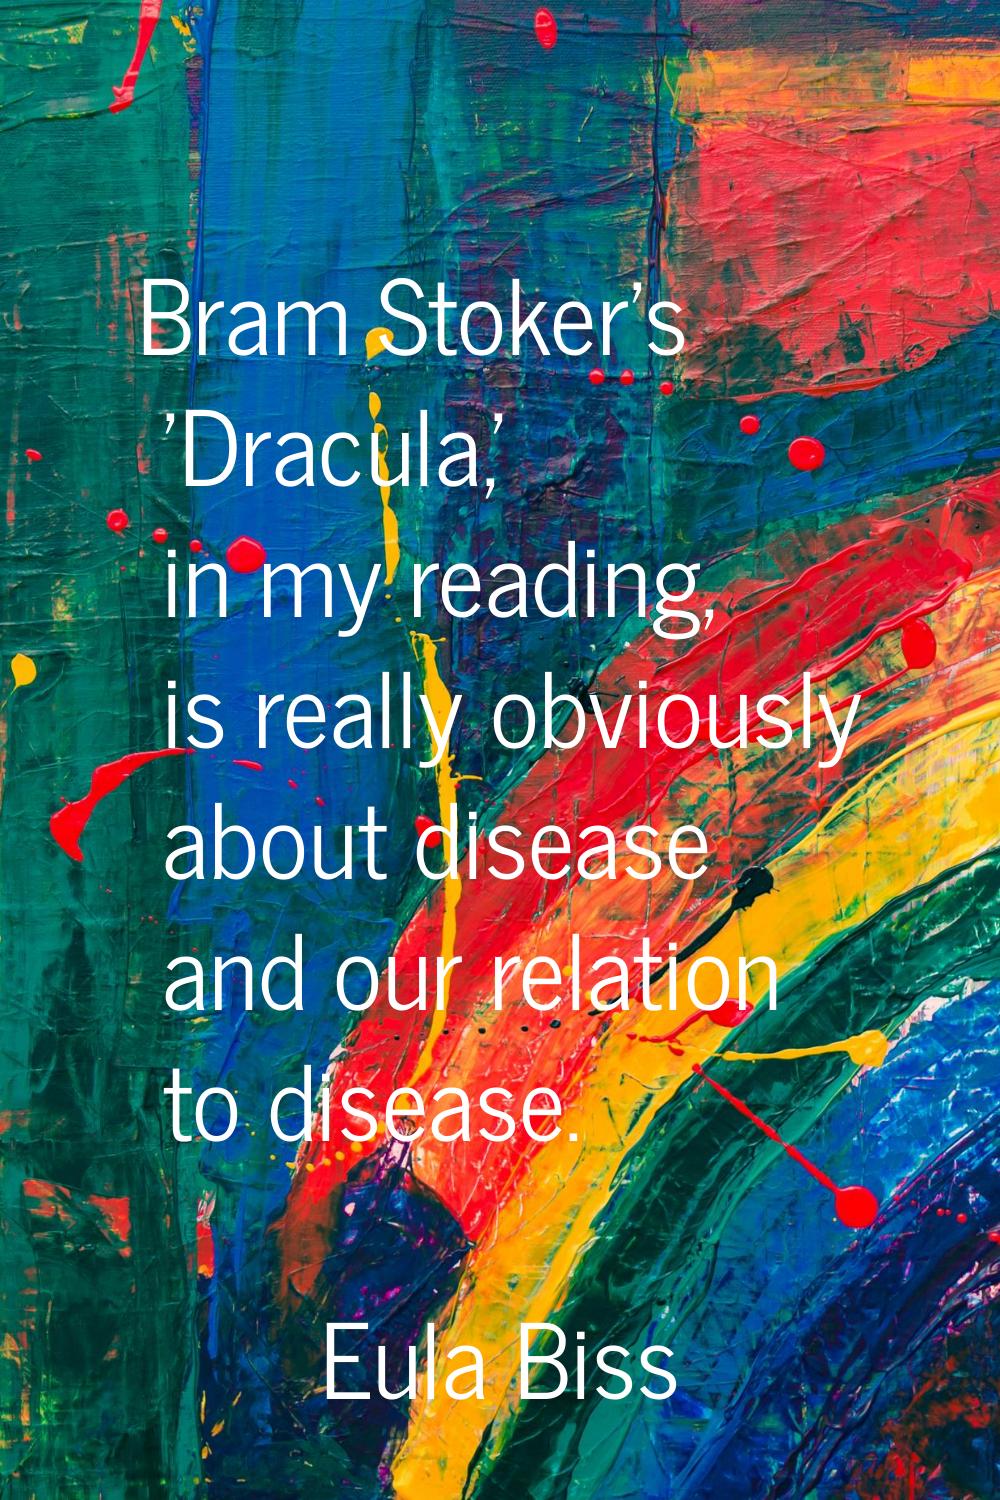 Bram Stoker's 'Dracula,' in my reading, is really obviously about disease and our relation to disea